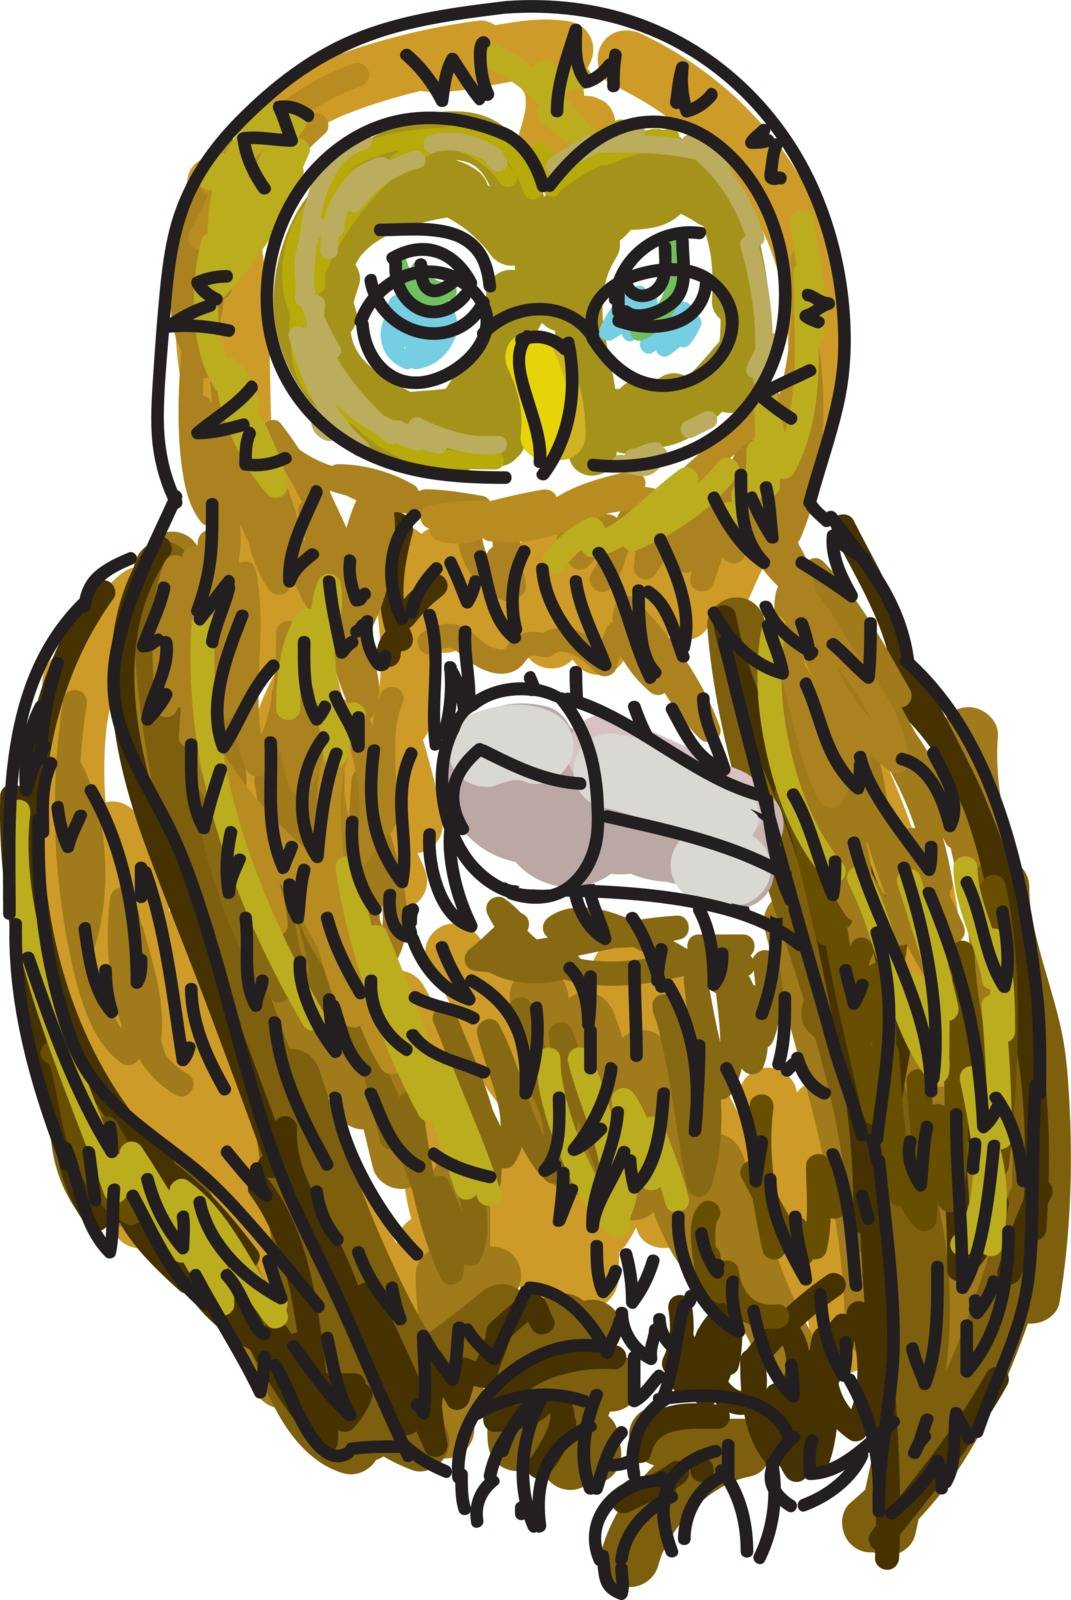 Drawn owl with diploma by cherezoff